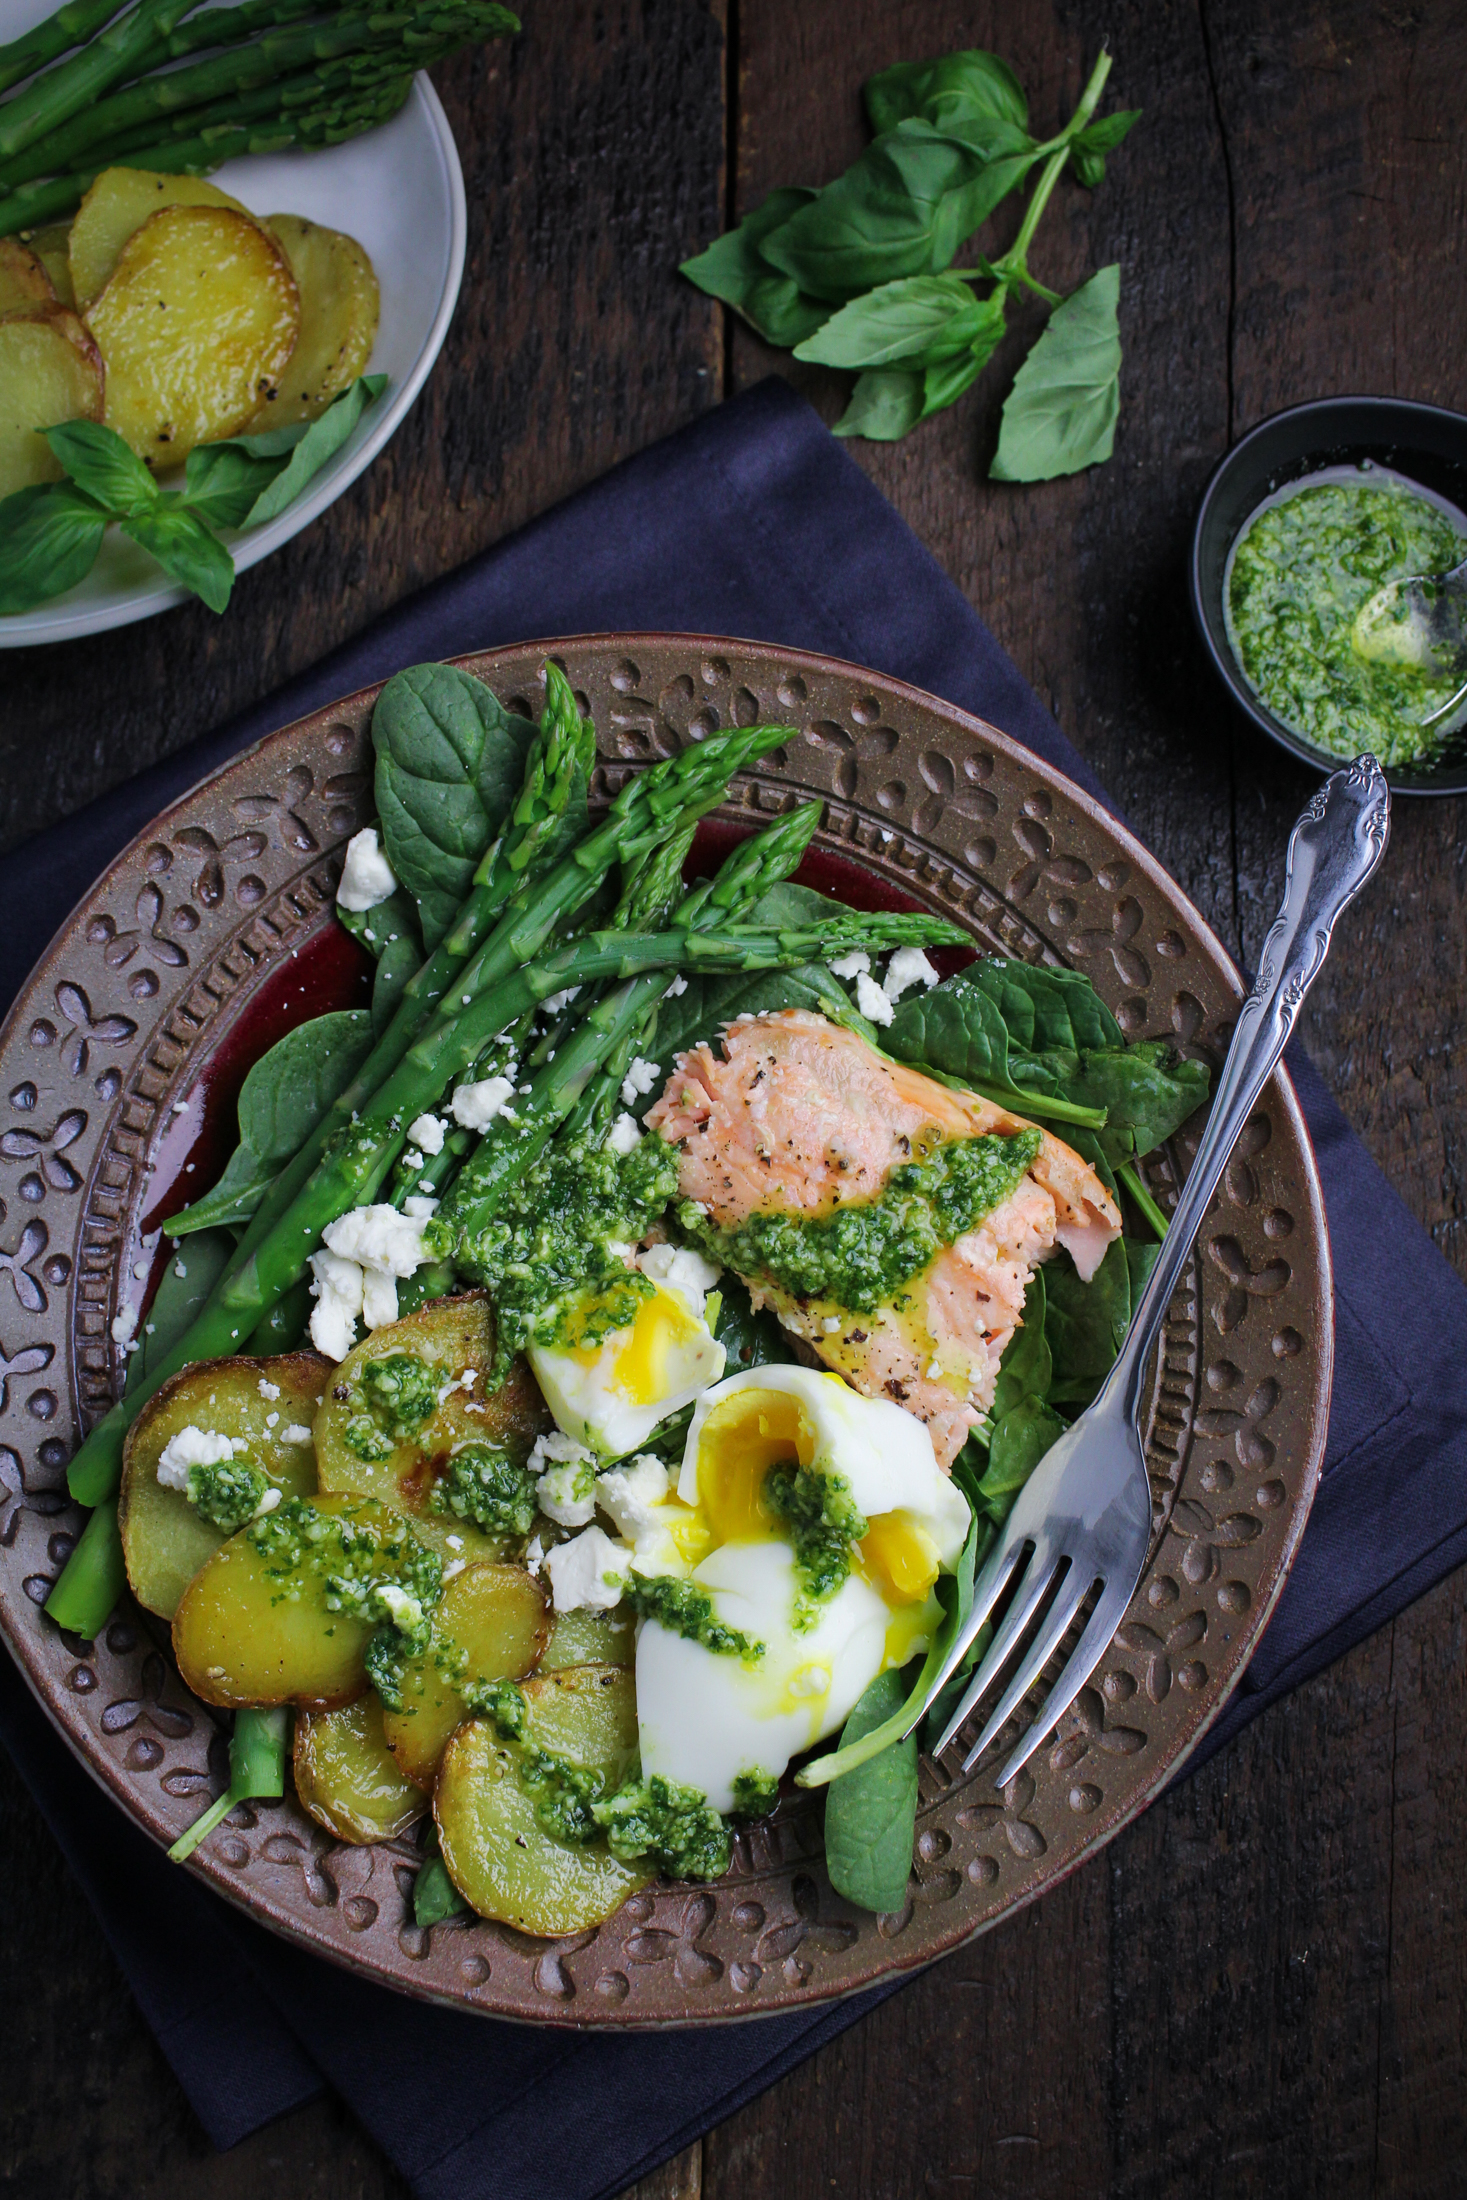 Salmon, Asparagus, and Roasted Potato Salad with Pesto Dressing and Soft-Boiled Egg {Katie at the Kitchen Door}